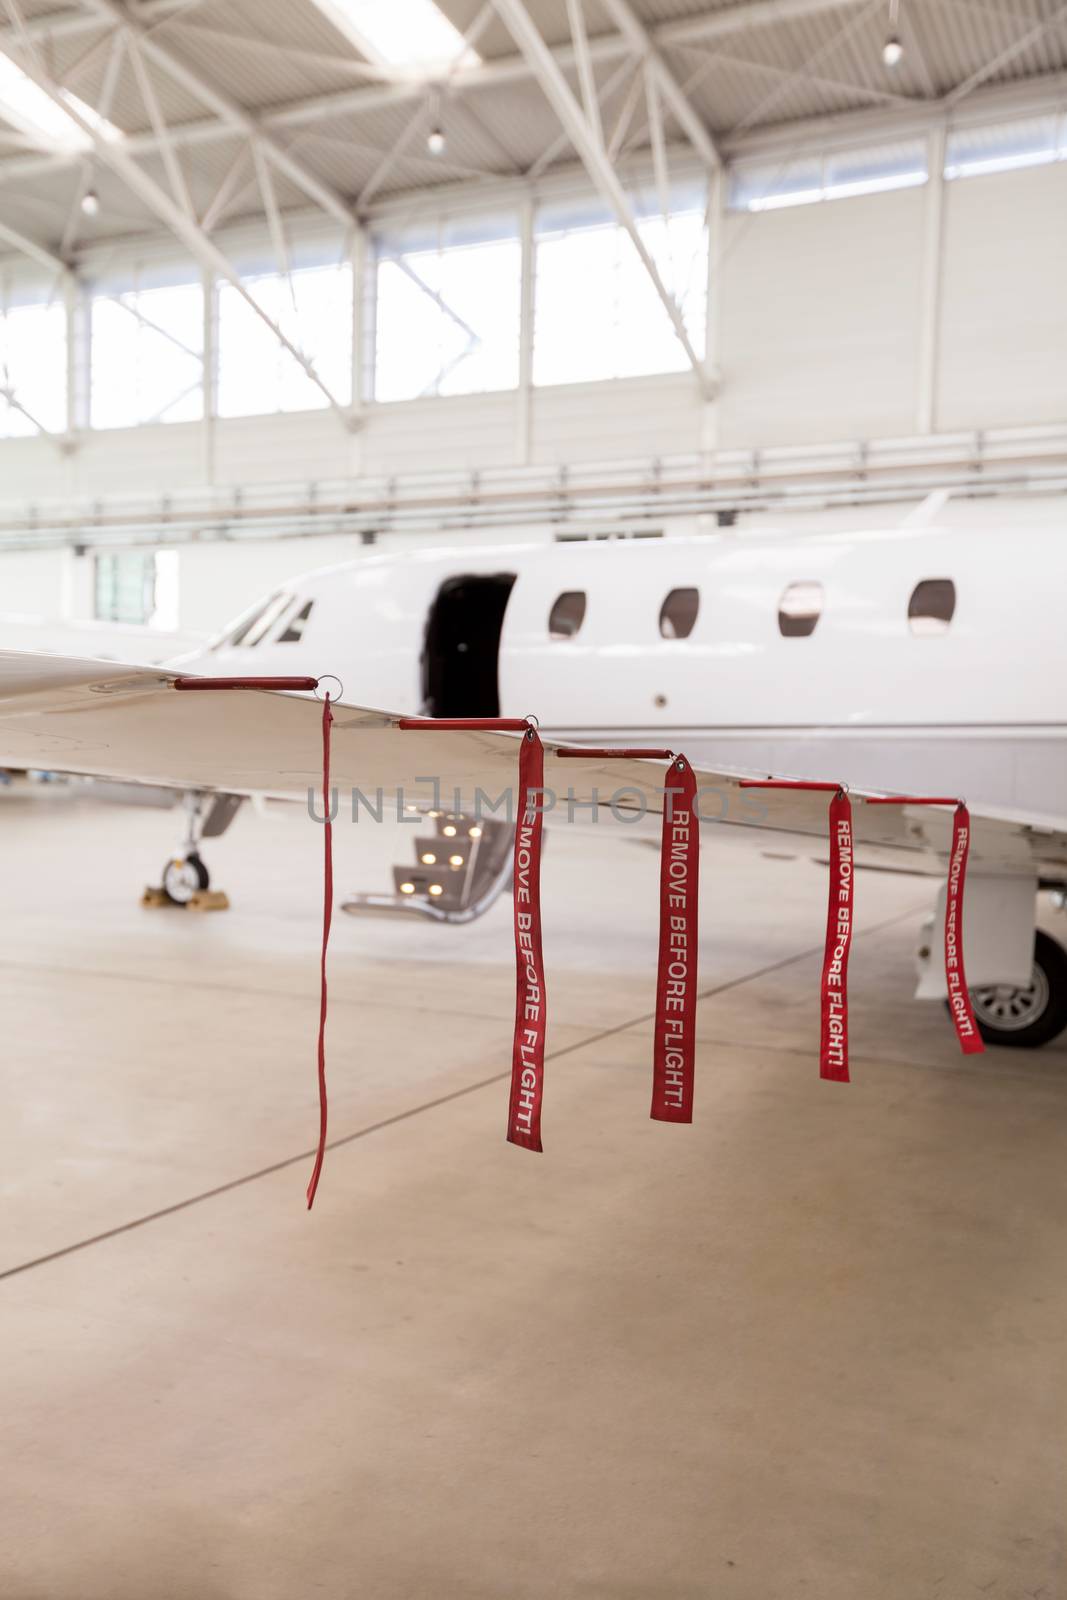 Airplane in Hangar with remove before flight Labels in red warning safety